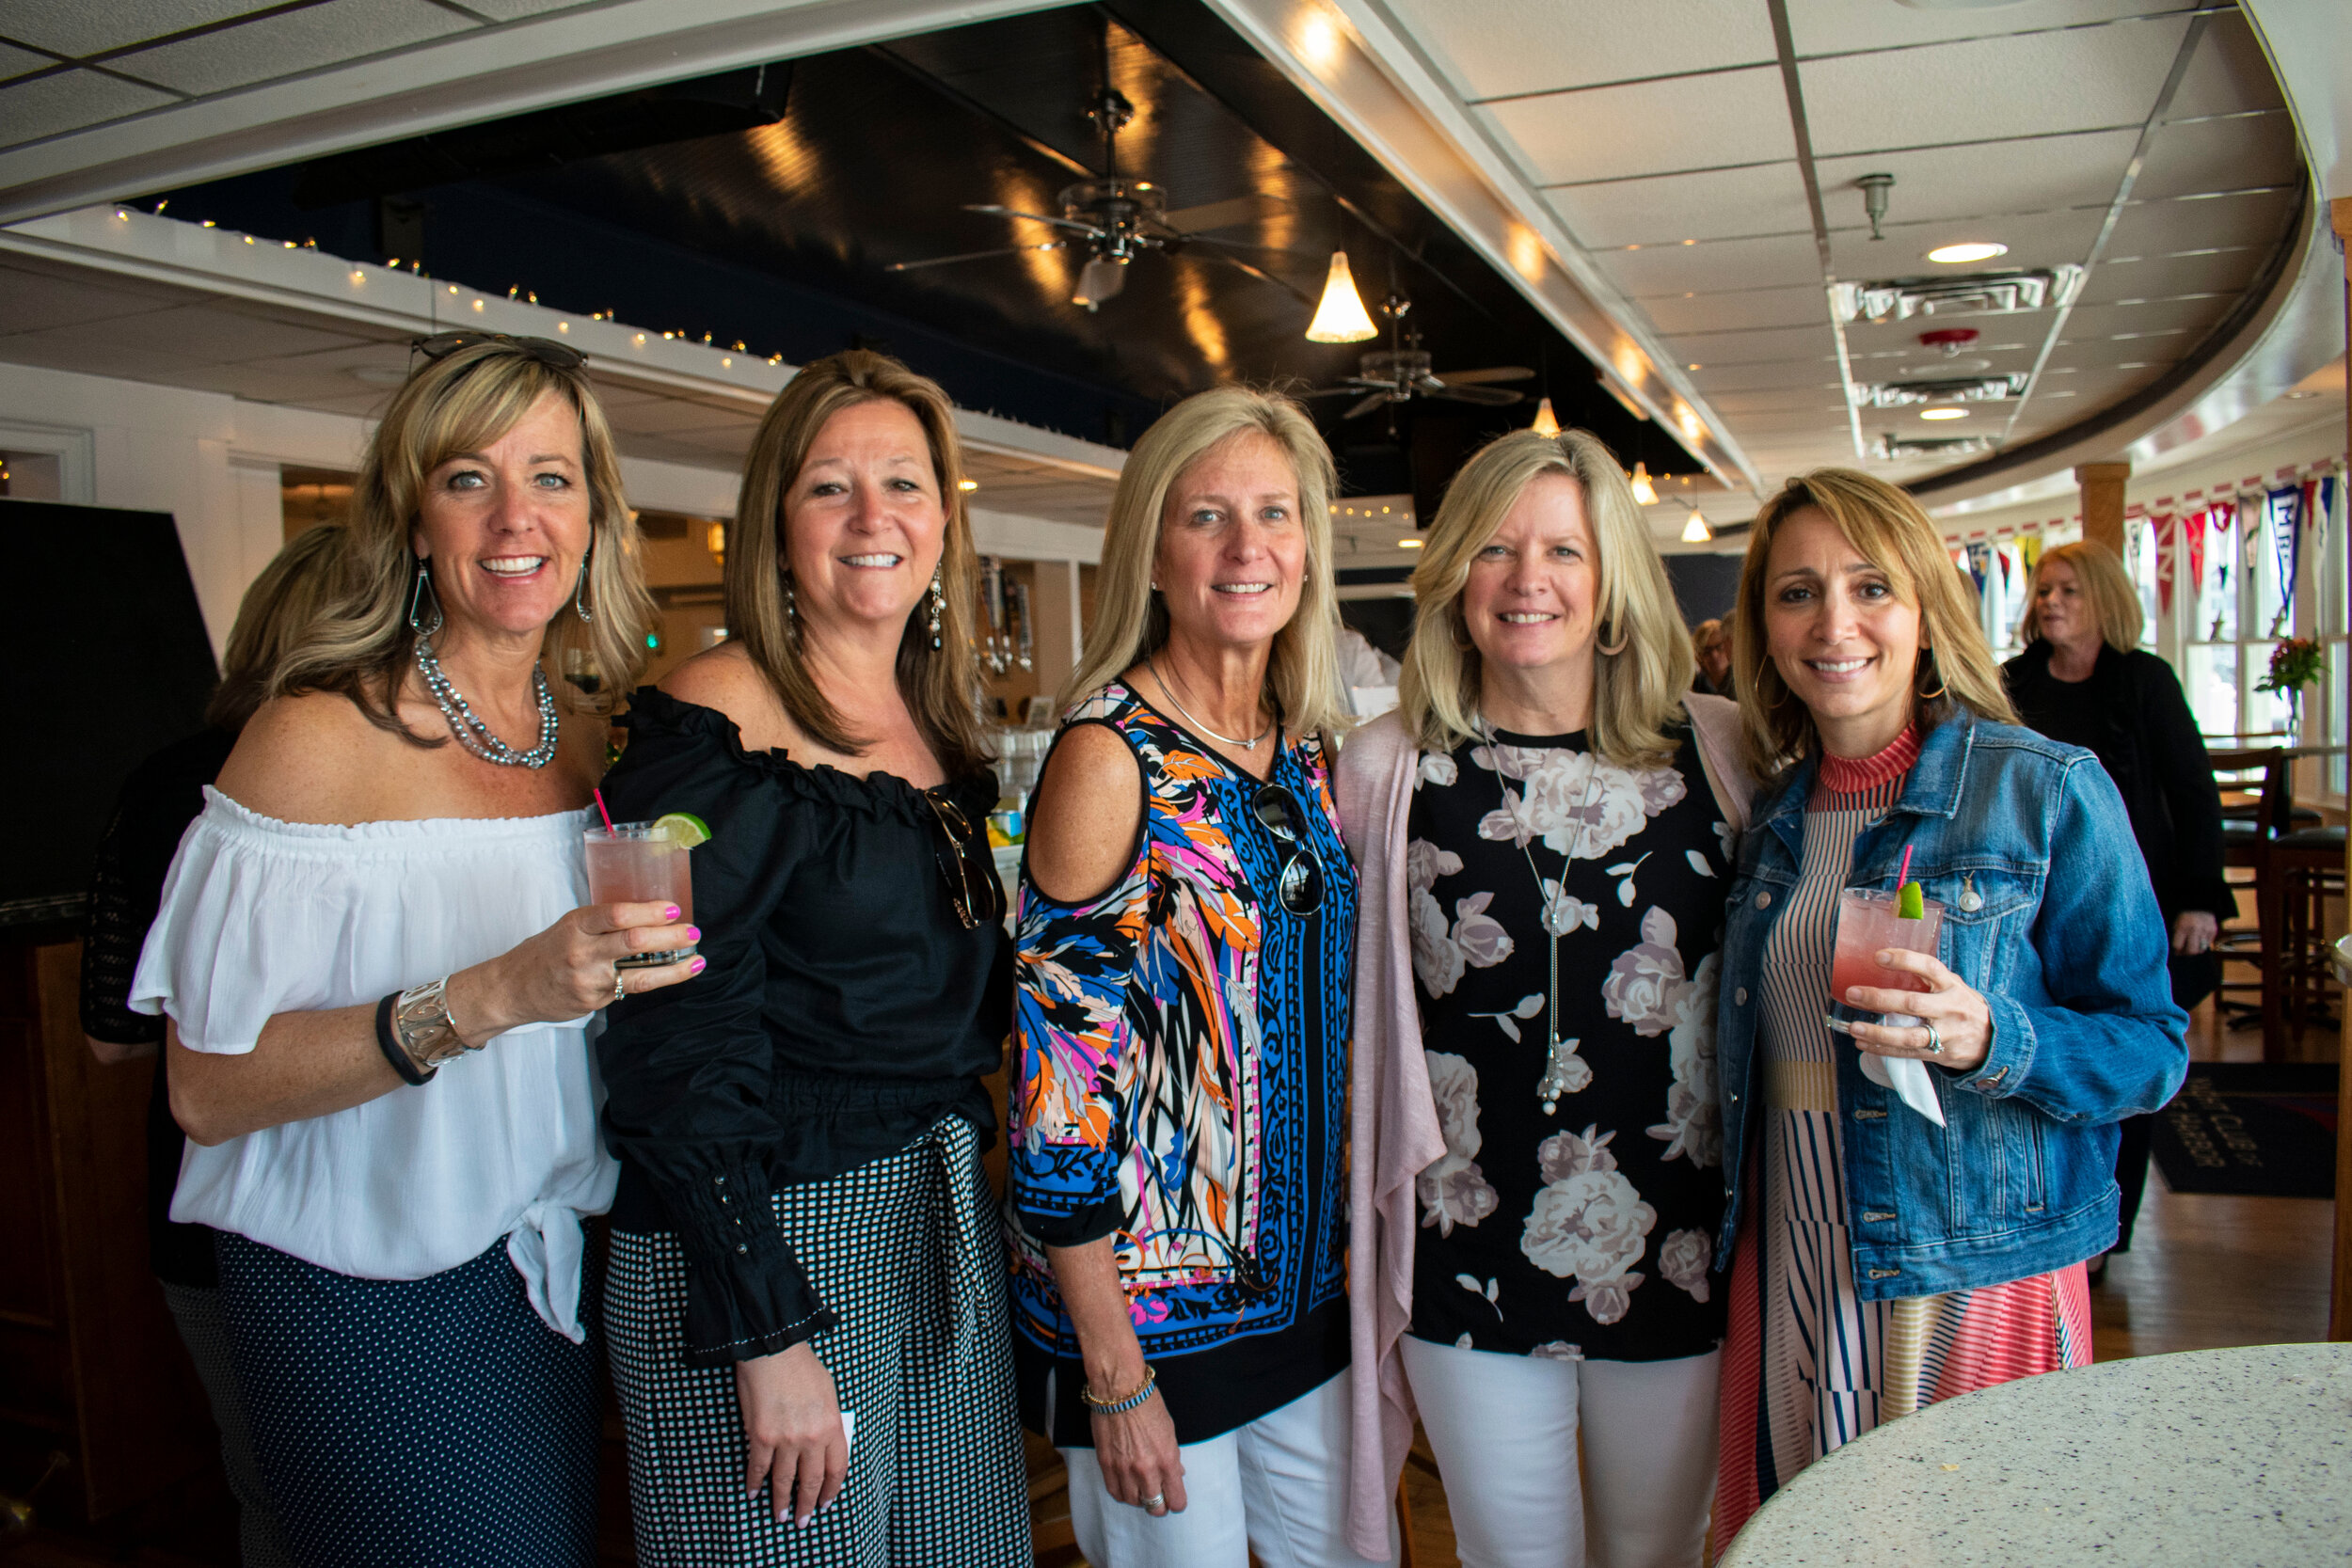 Deb Castare, Jill Nestor, Jan Gianforte, Tracey Littleton and Natalie Lawton enjoy fashion and fun at the 2018 Play With Jack Fashion Show.